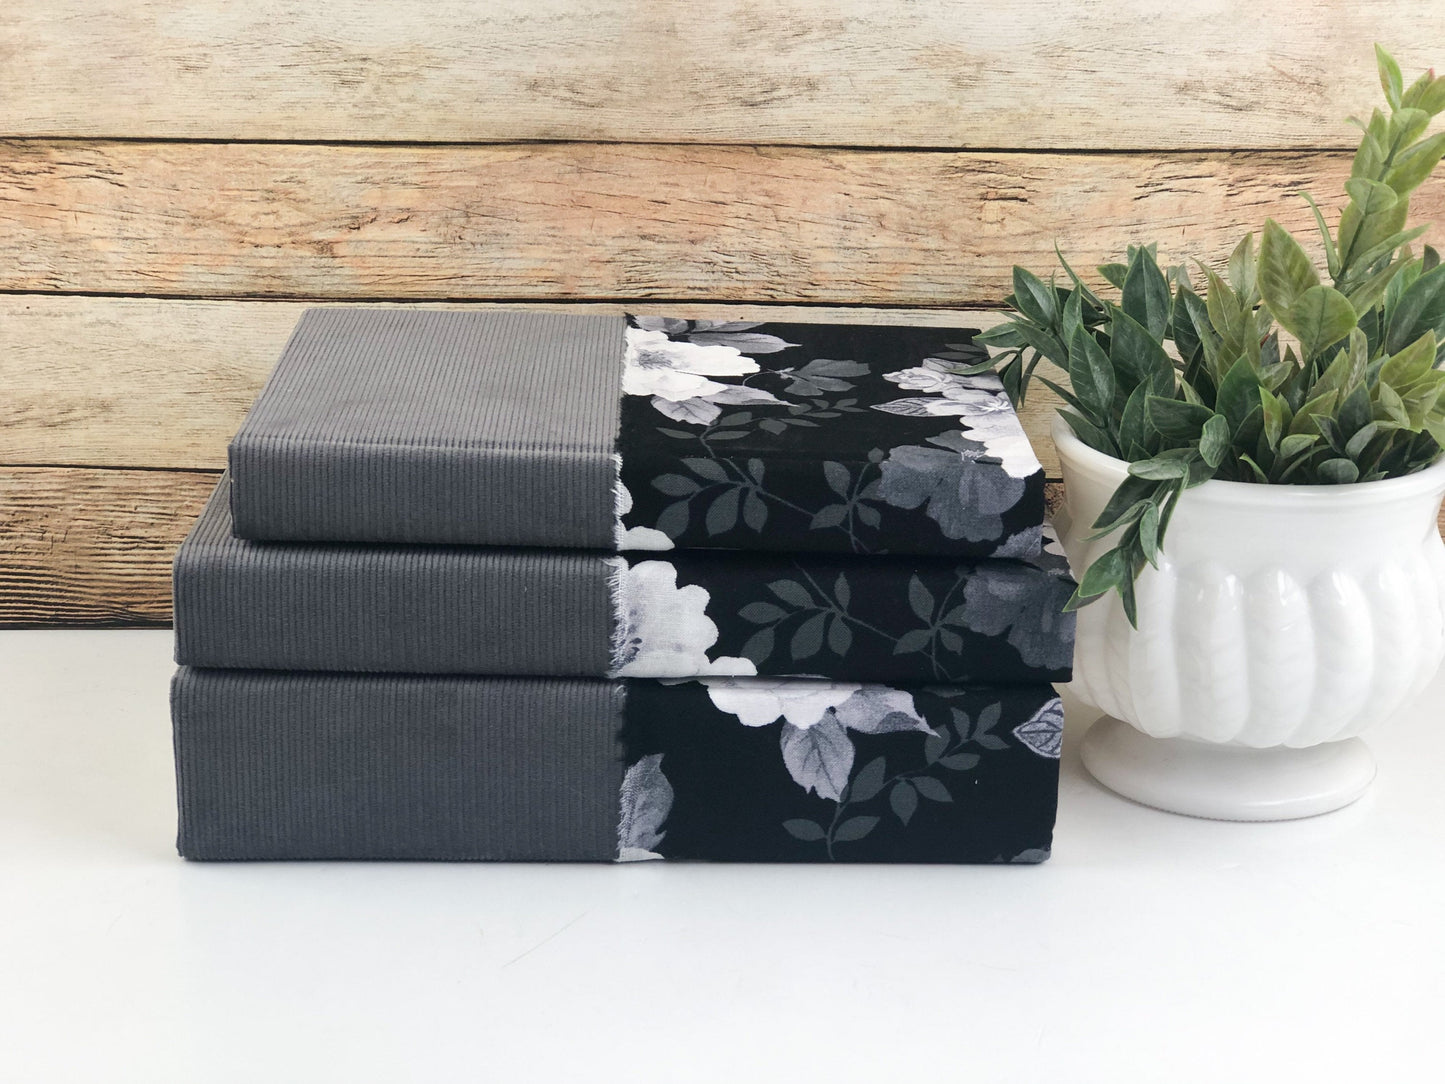 Gray and Black Fabric Covered Books